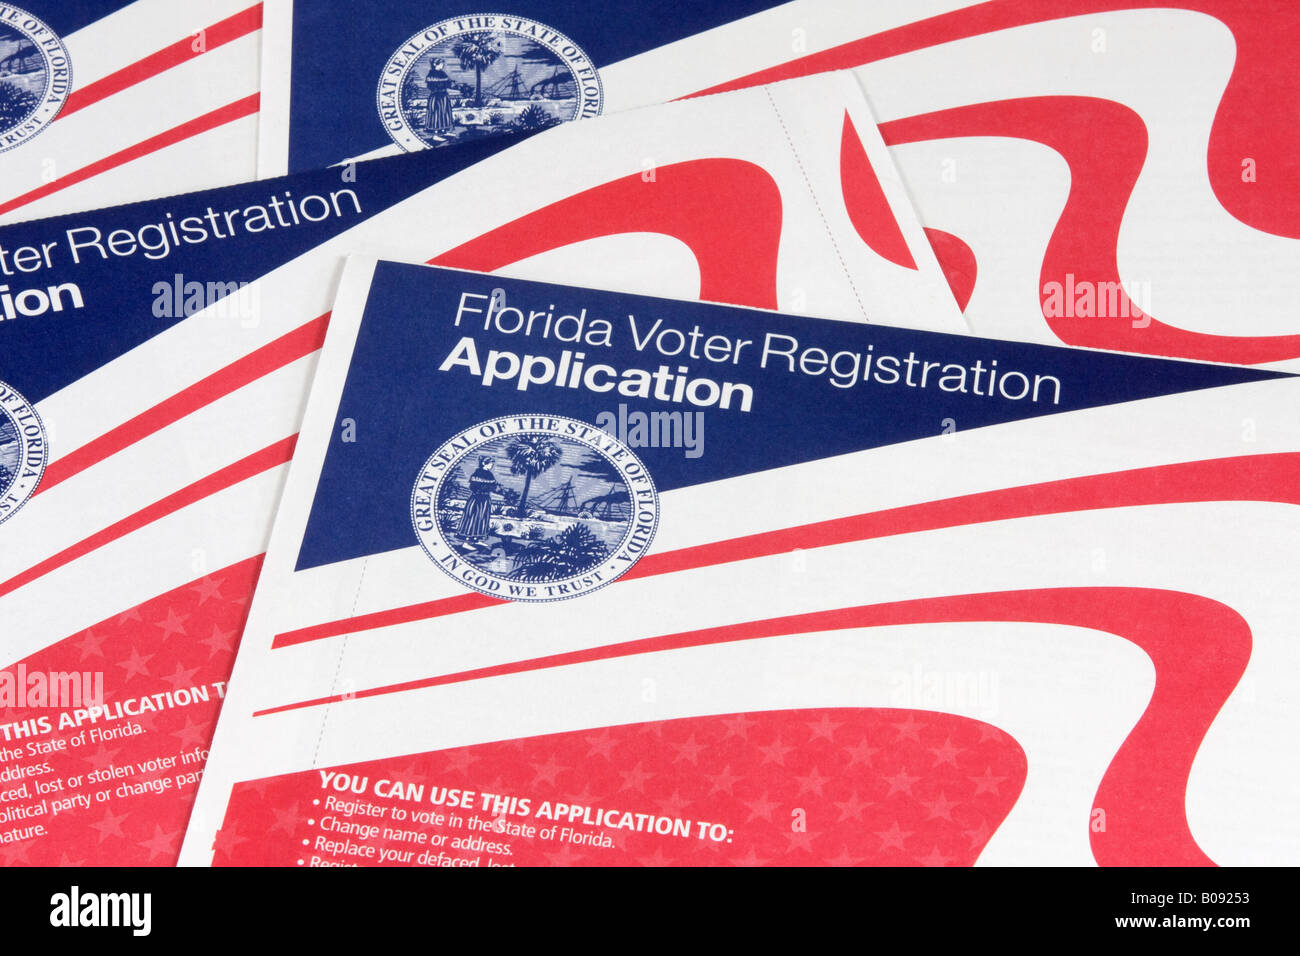 Voter registration cards, application form for elections, Florida, USA Stock Photo